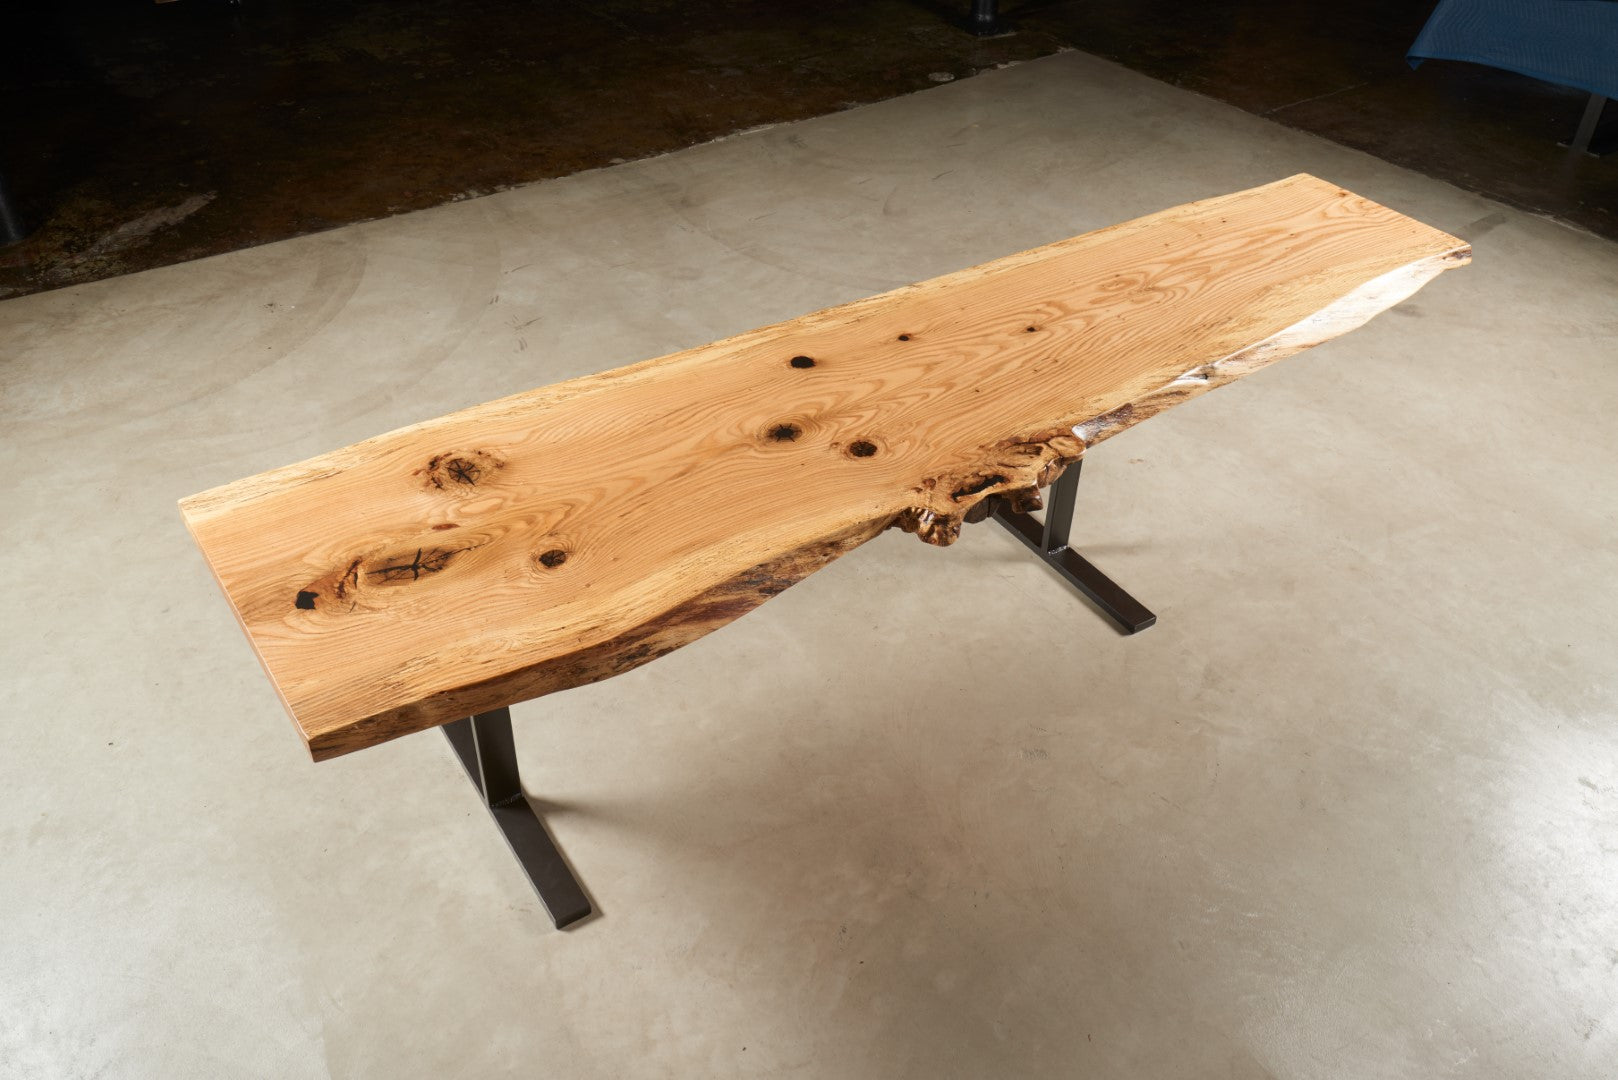 Ideas In wood - Oak Timber/river Table/Character/live Edge/hard Wood/boards  slabs. This board is Air Dried European Red Oak Live Edge Measures 1145mm x  550mm(max) 400mm(min) x 26mm Old money 45” x 21.5”-15.75”